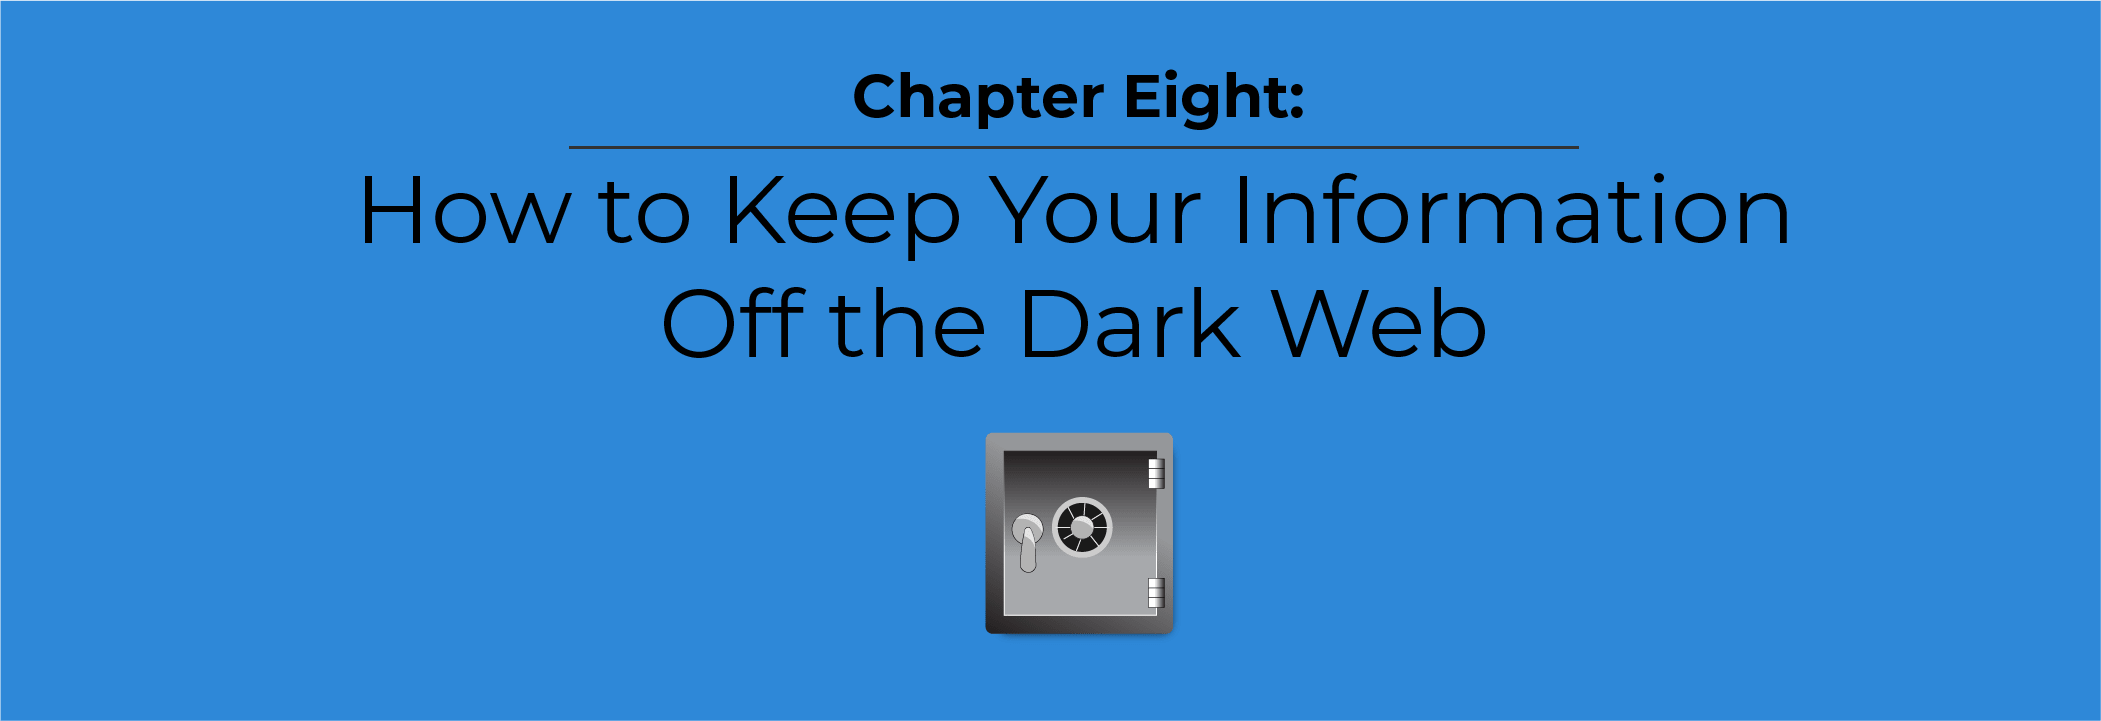 How to Keep Your Information Off the Dark Web